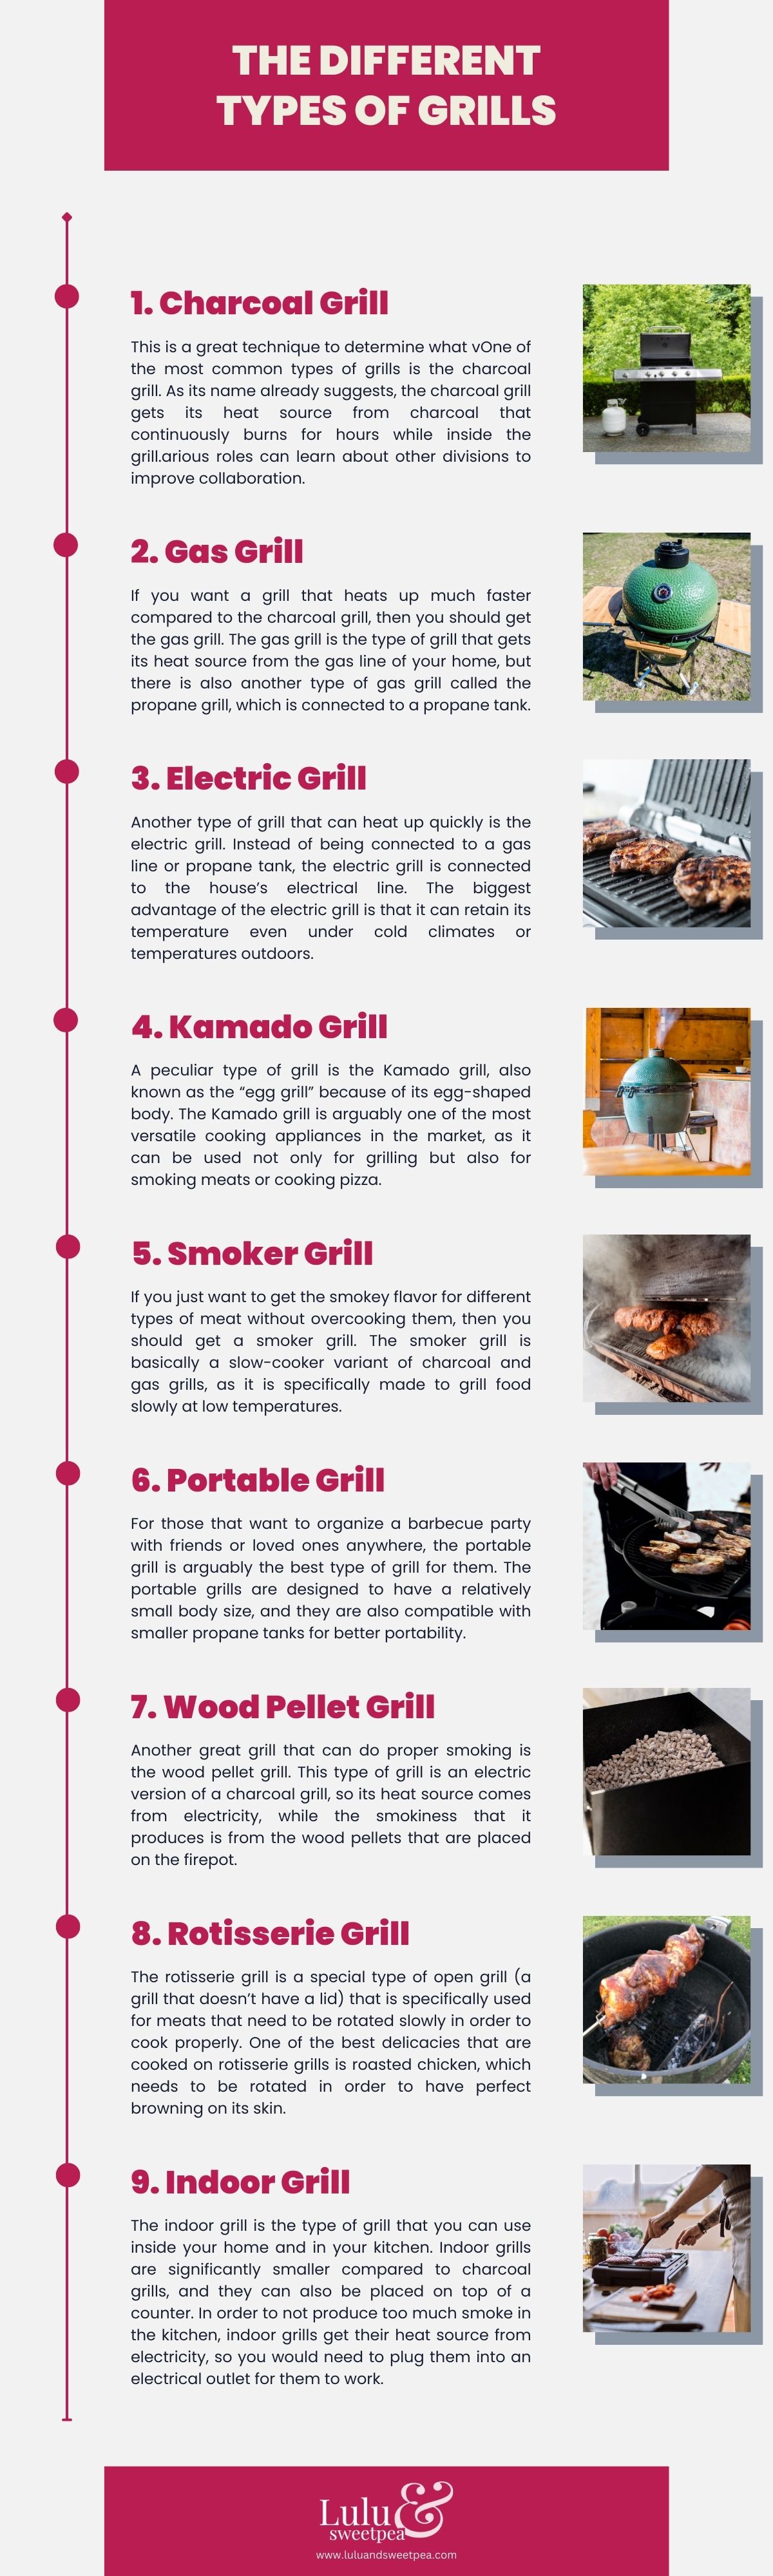 The Different Types of Grills